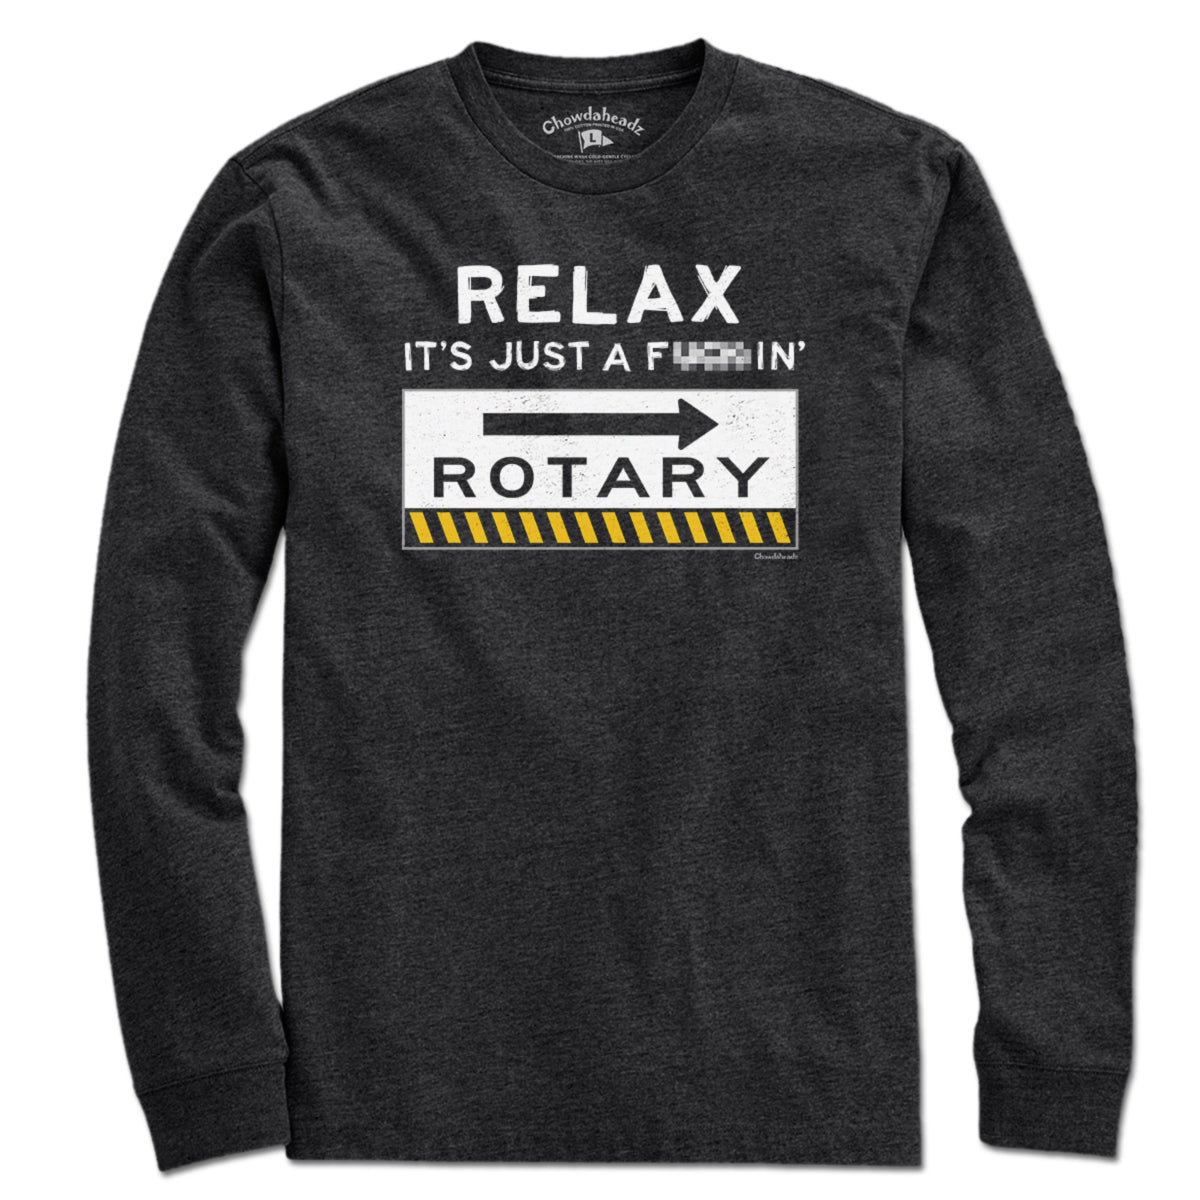 Relax It's Just A F---in' Rotary T-Shirt - Chowdaheadz